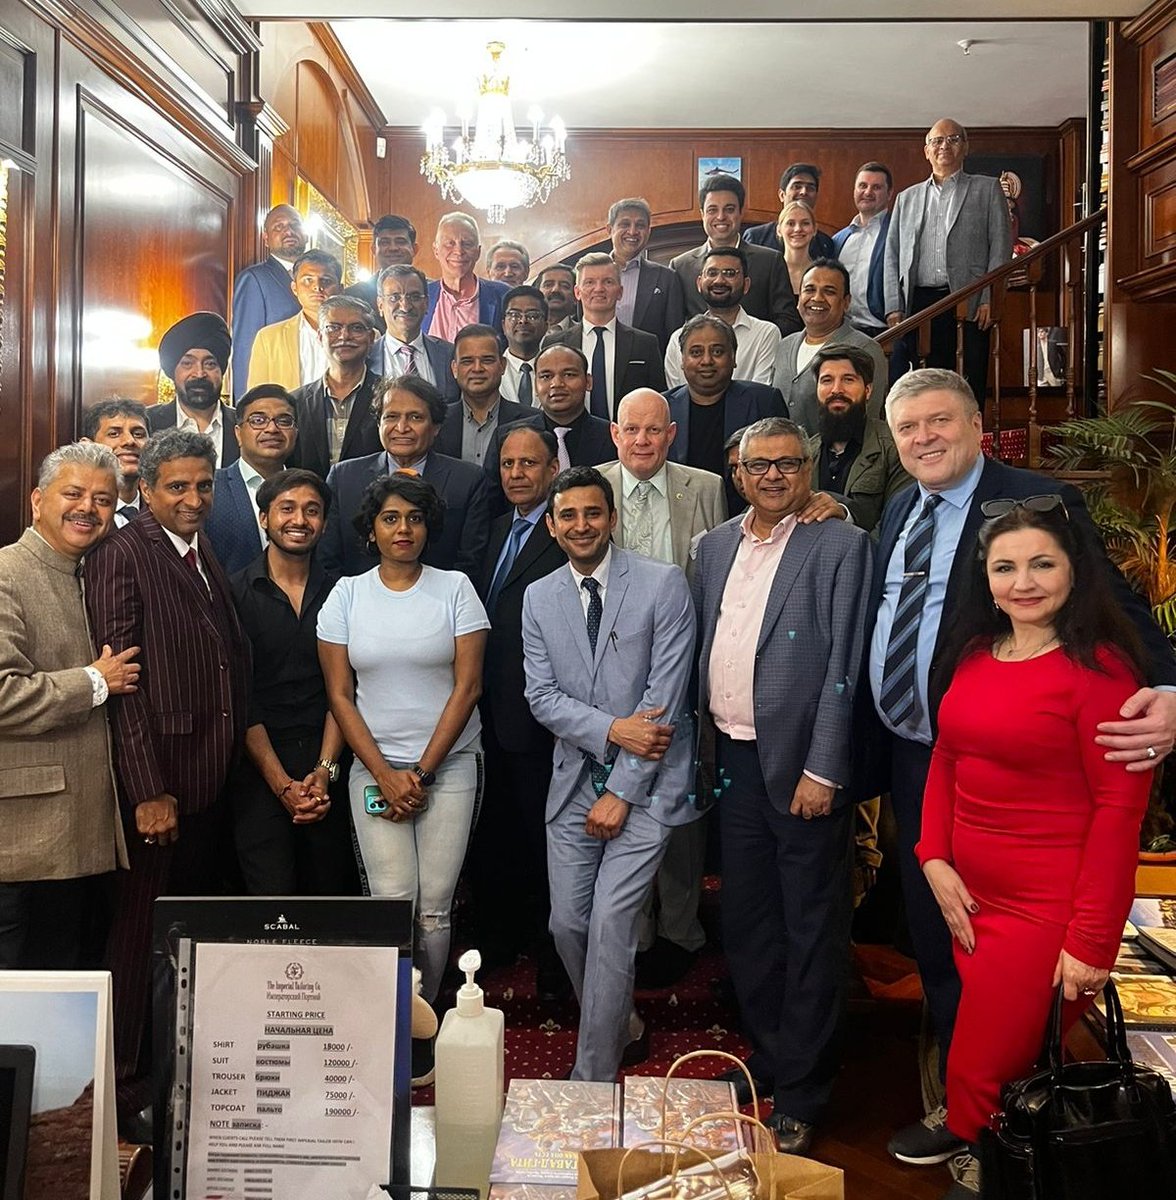 Good to meet entrepreneurs, technology experts, and members of the Overseas Friends of @BJP4India in Moscow. Excellent interaction with these bright and patriotic friends